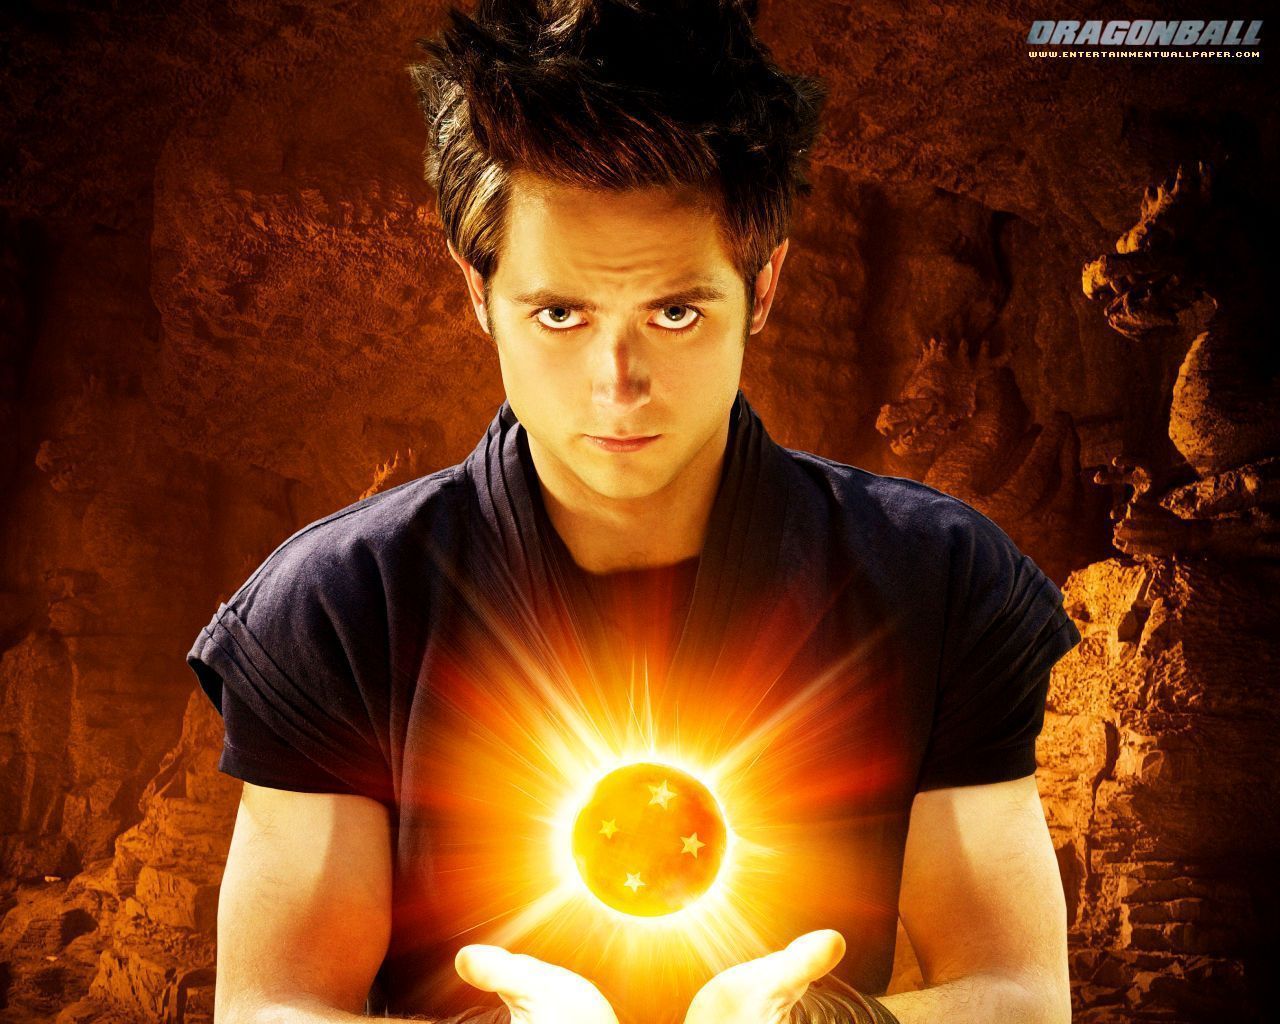 Movies: Dragonball Evolution, picture nr. 36525